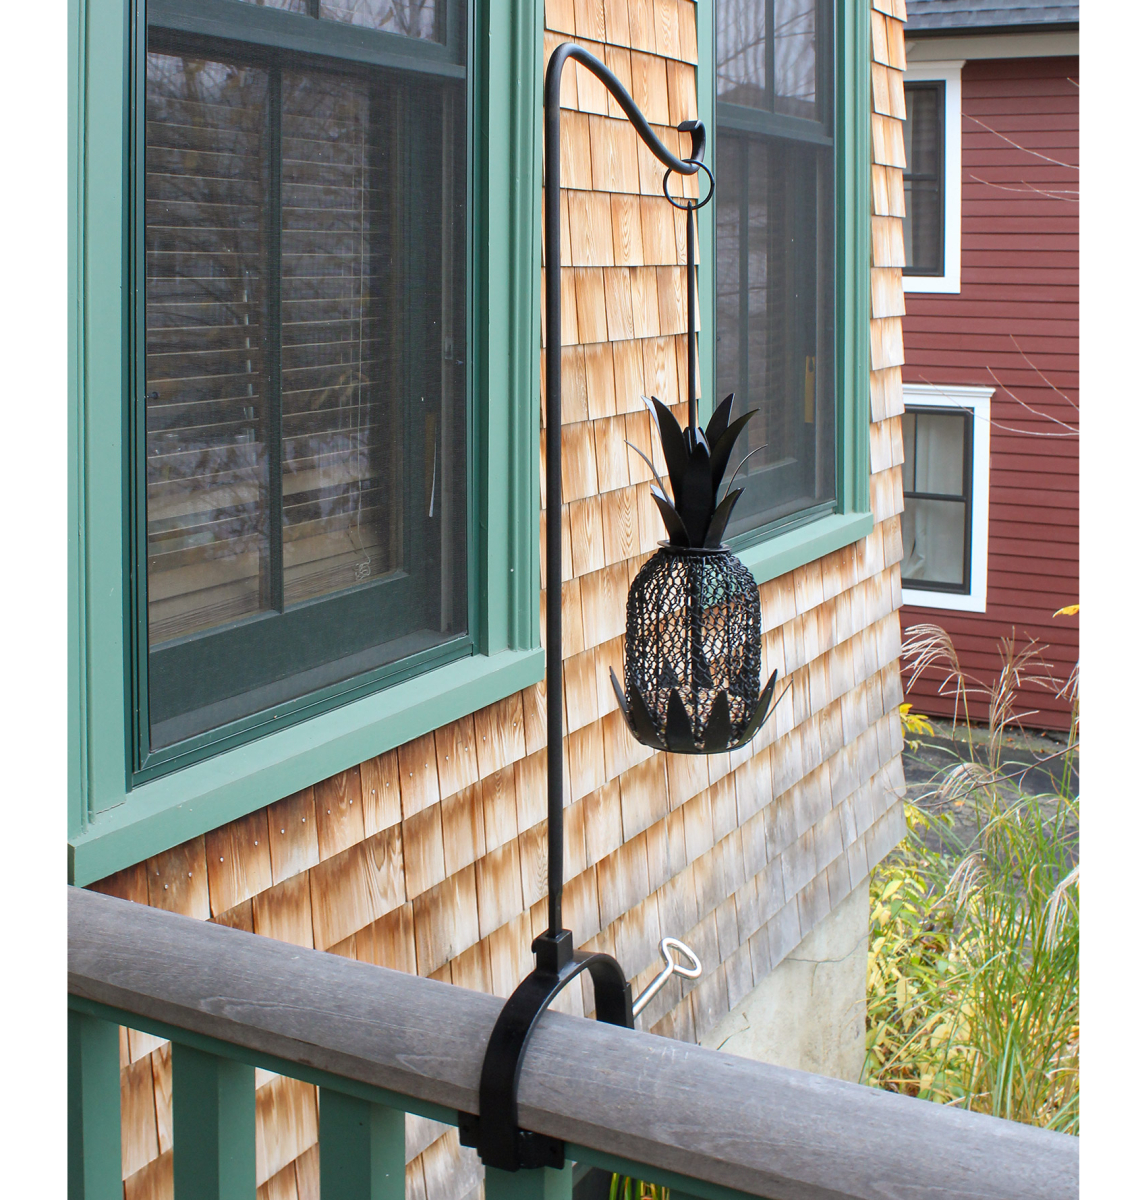 Achla Shepherds Hook with Over Railing Bracket, Handcrafted Deck Railing  Hooks at Songbird Garden